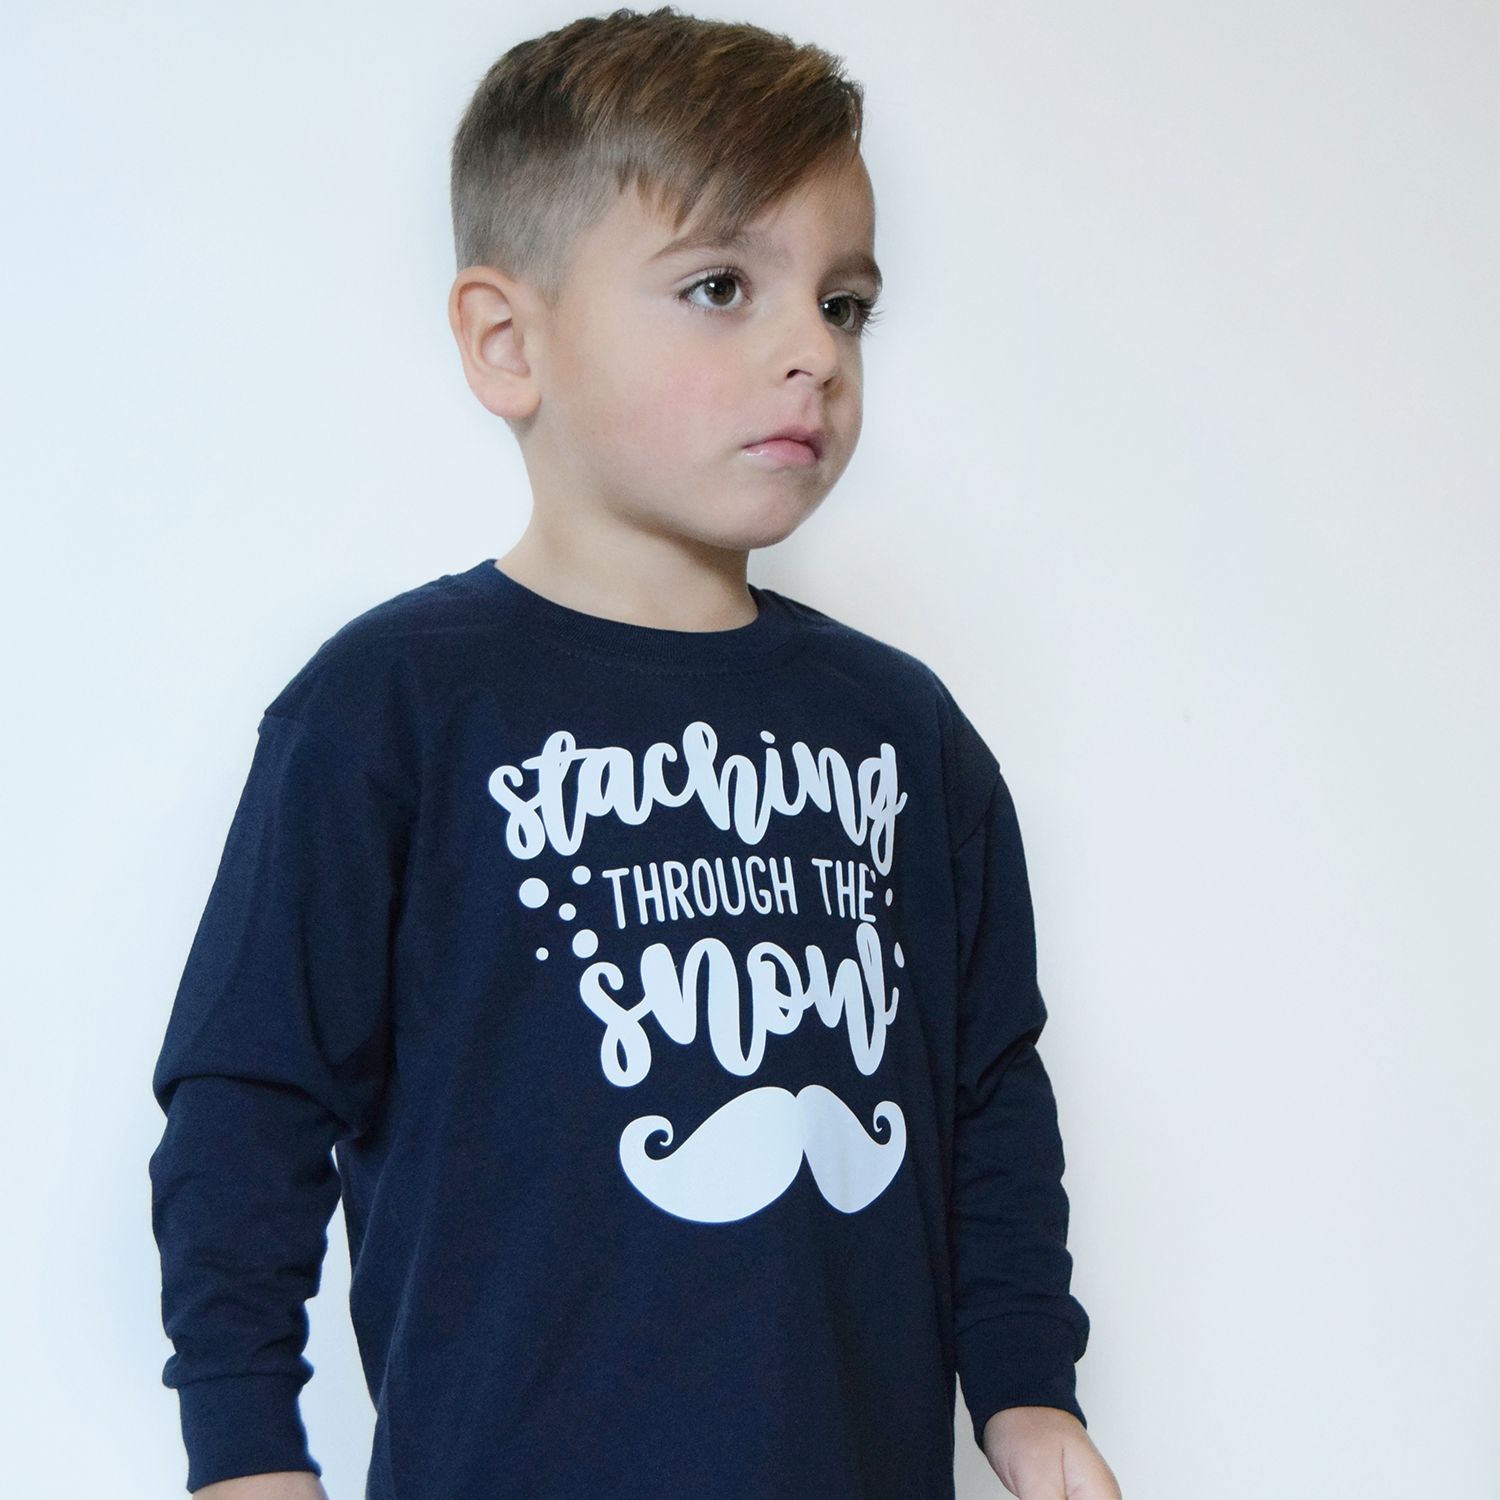 Serious young boy wearing navy shirt with long sleeves with 'Staching through the snow' print by KMLeon.